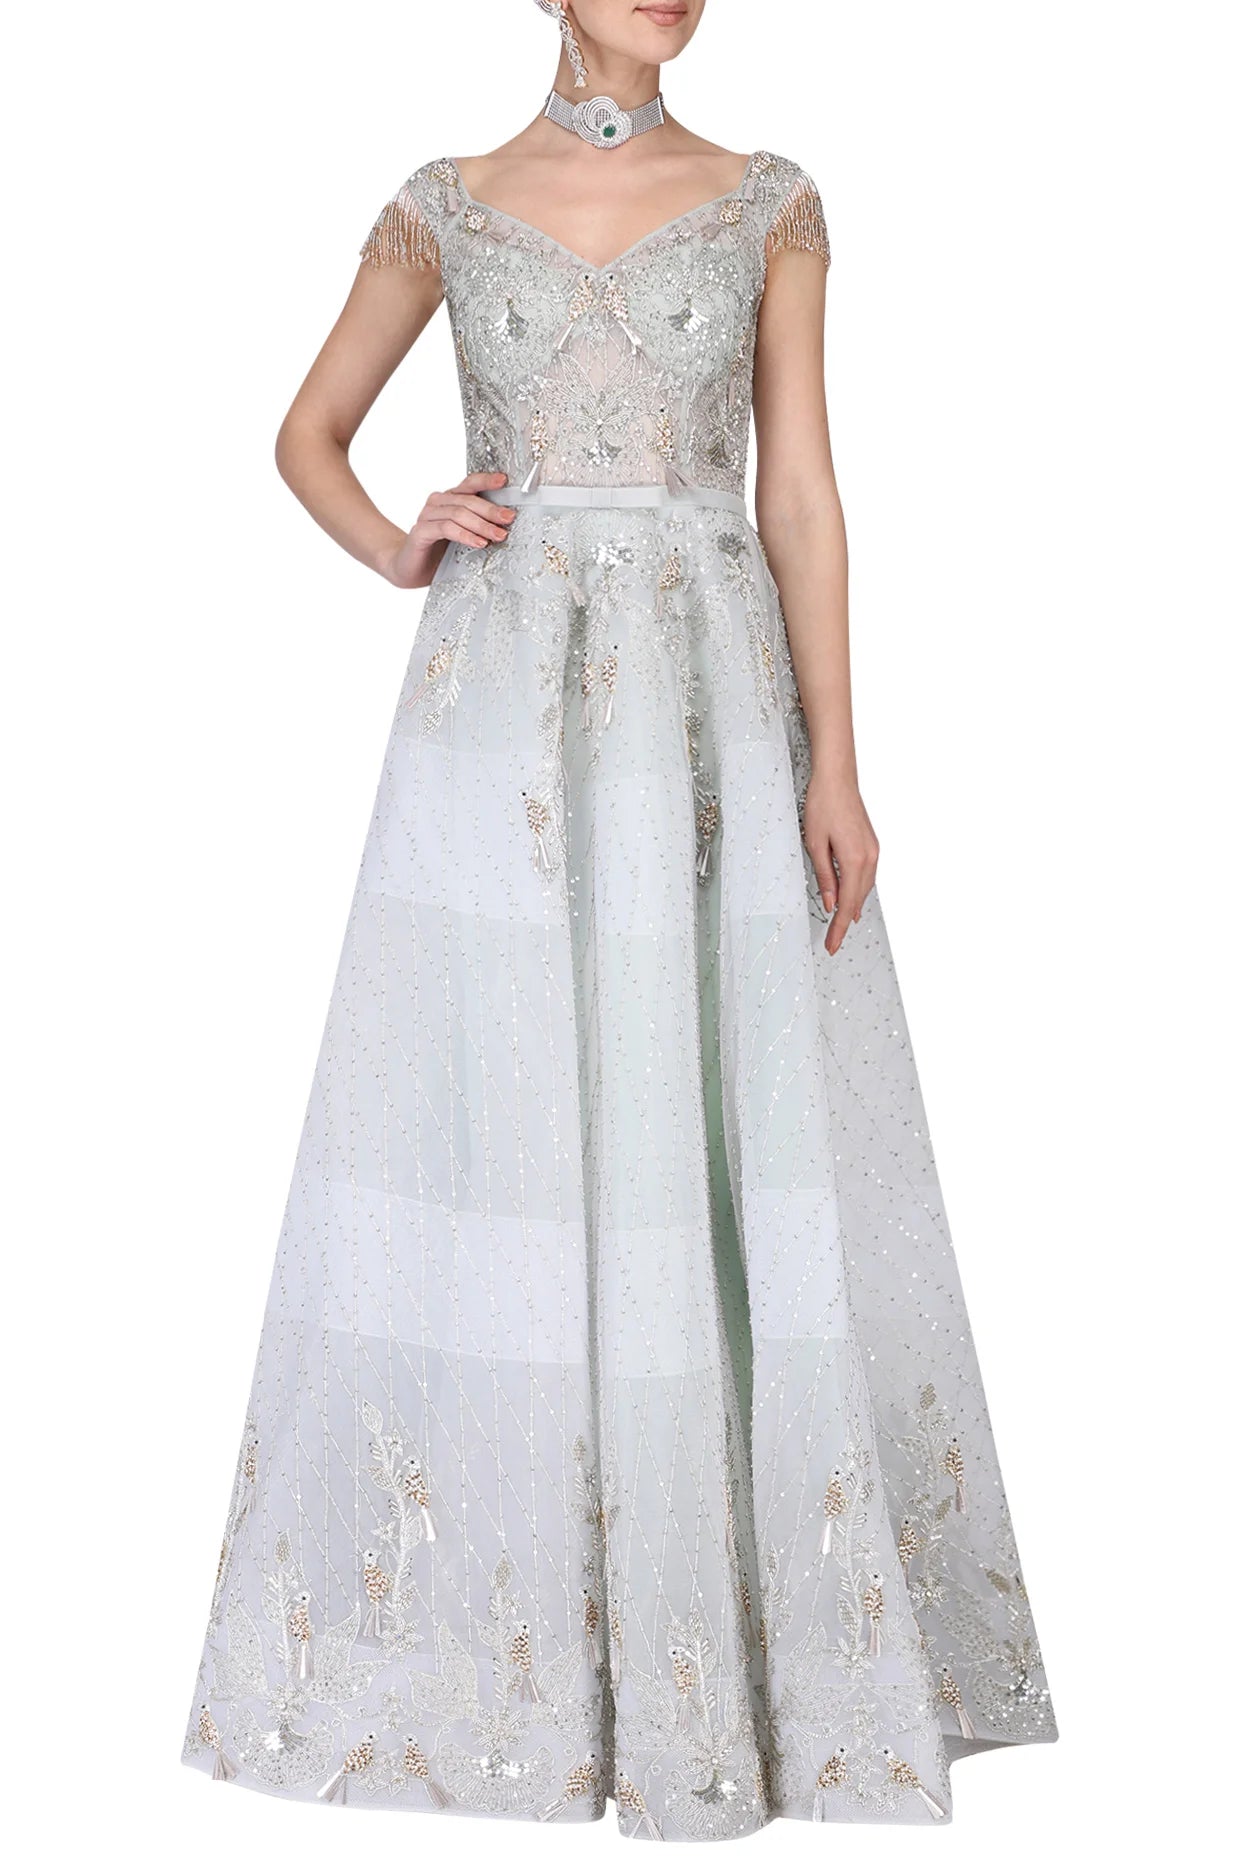 Sea Foam Ball Gown With Golden And Silver Birds And Waterlily Motifs   Elegant Fashion